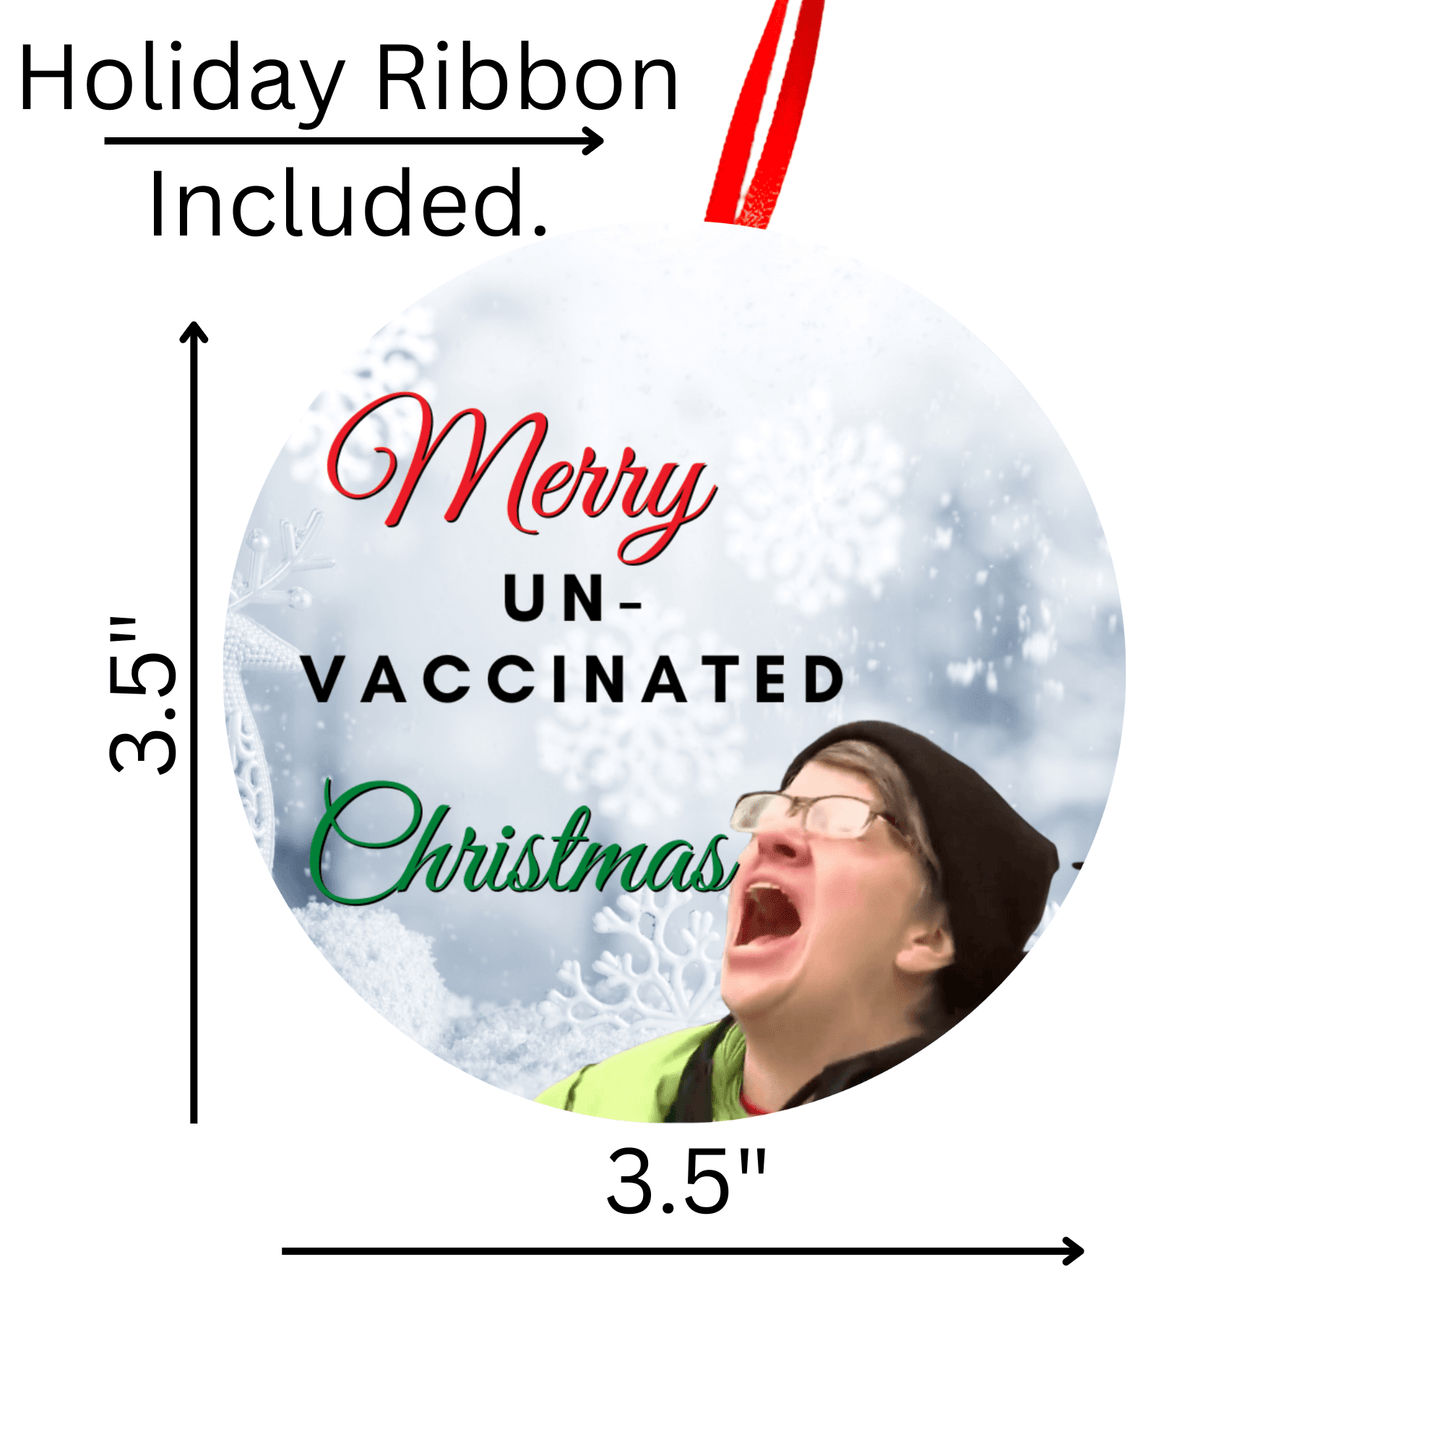 Merry UN-Vaccinated Christmas Ornament.